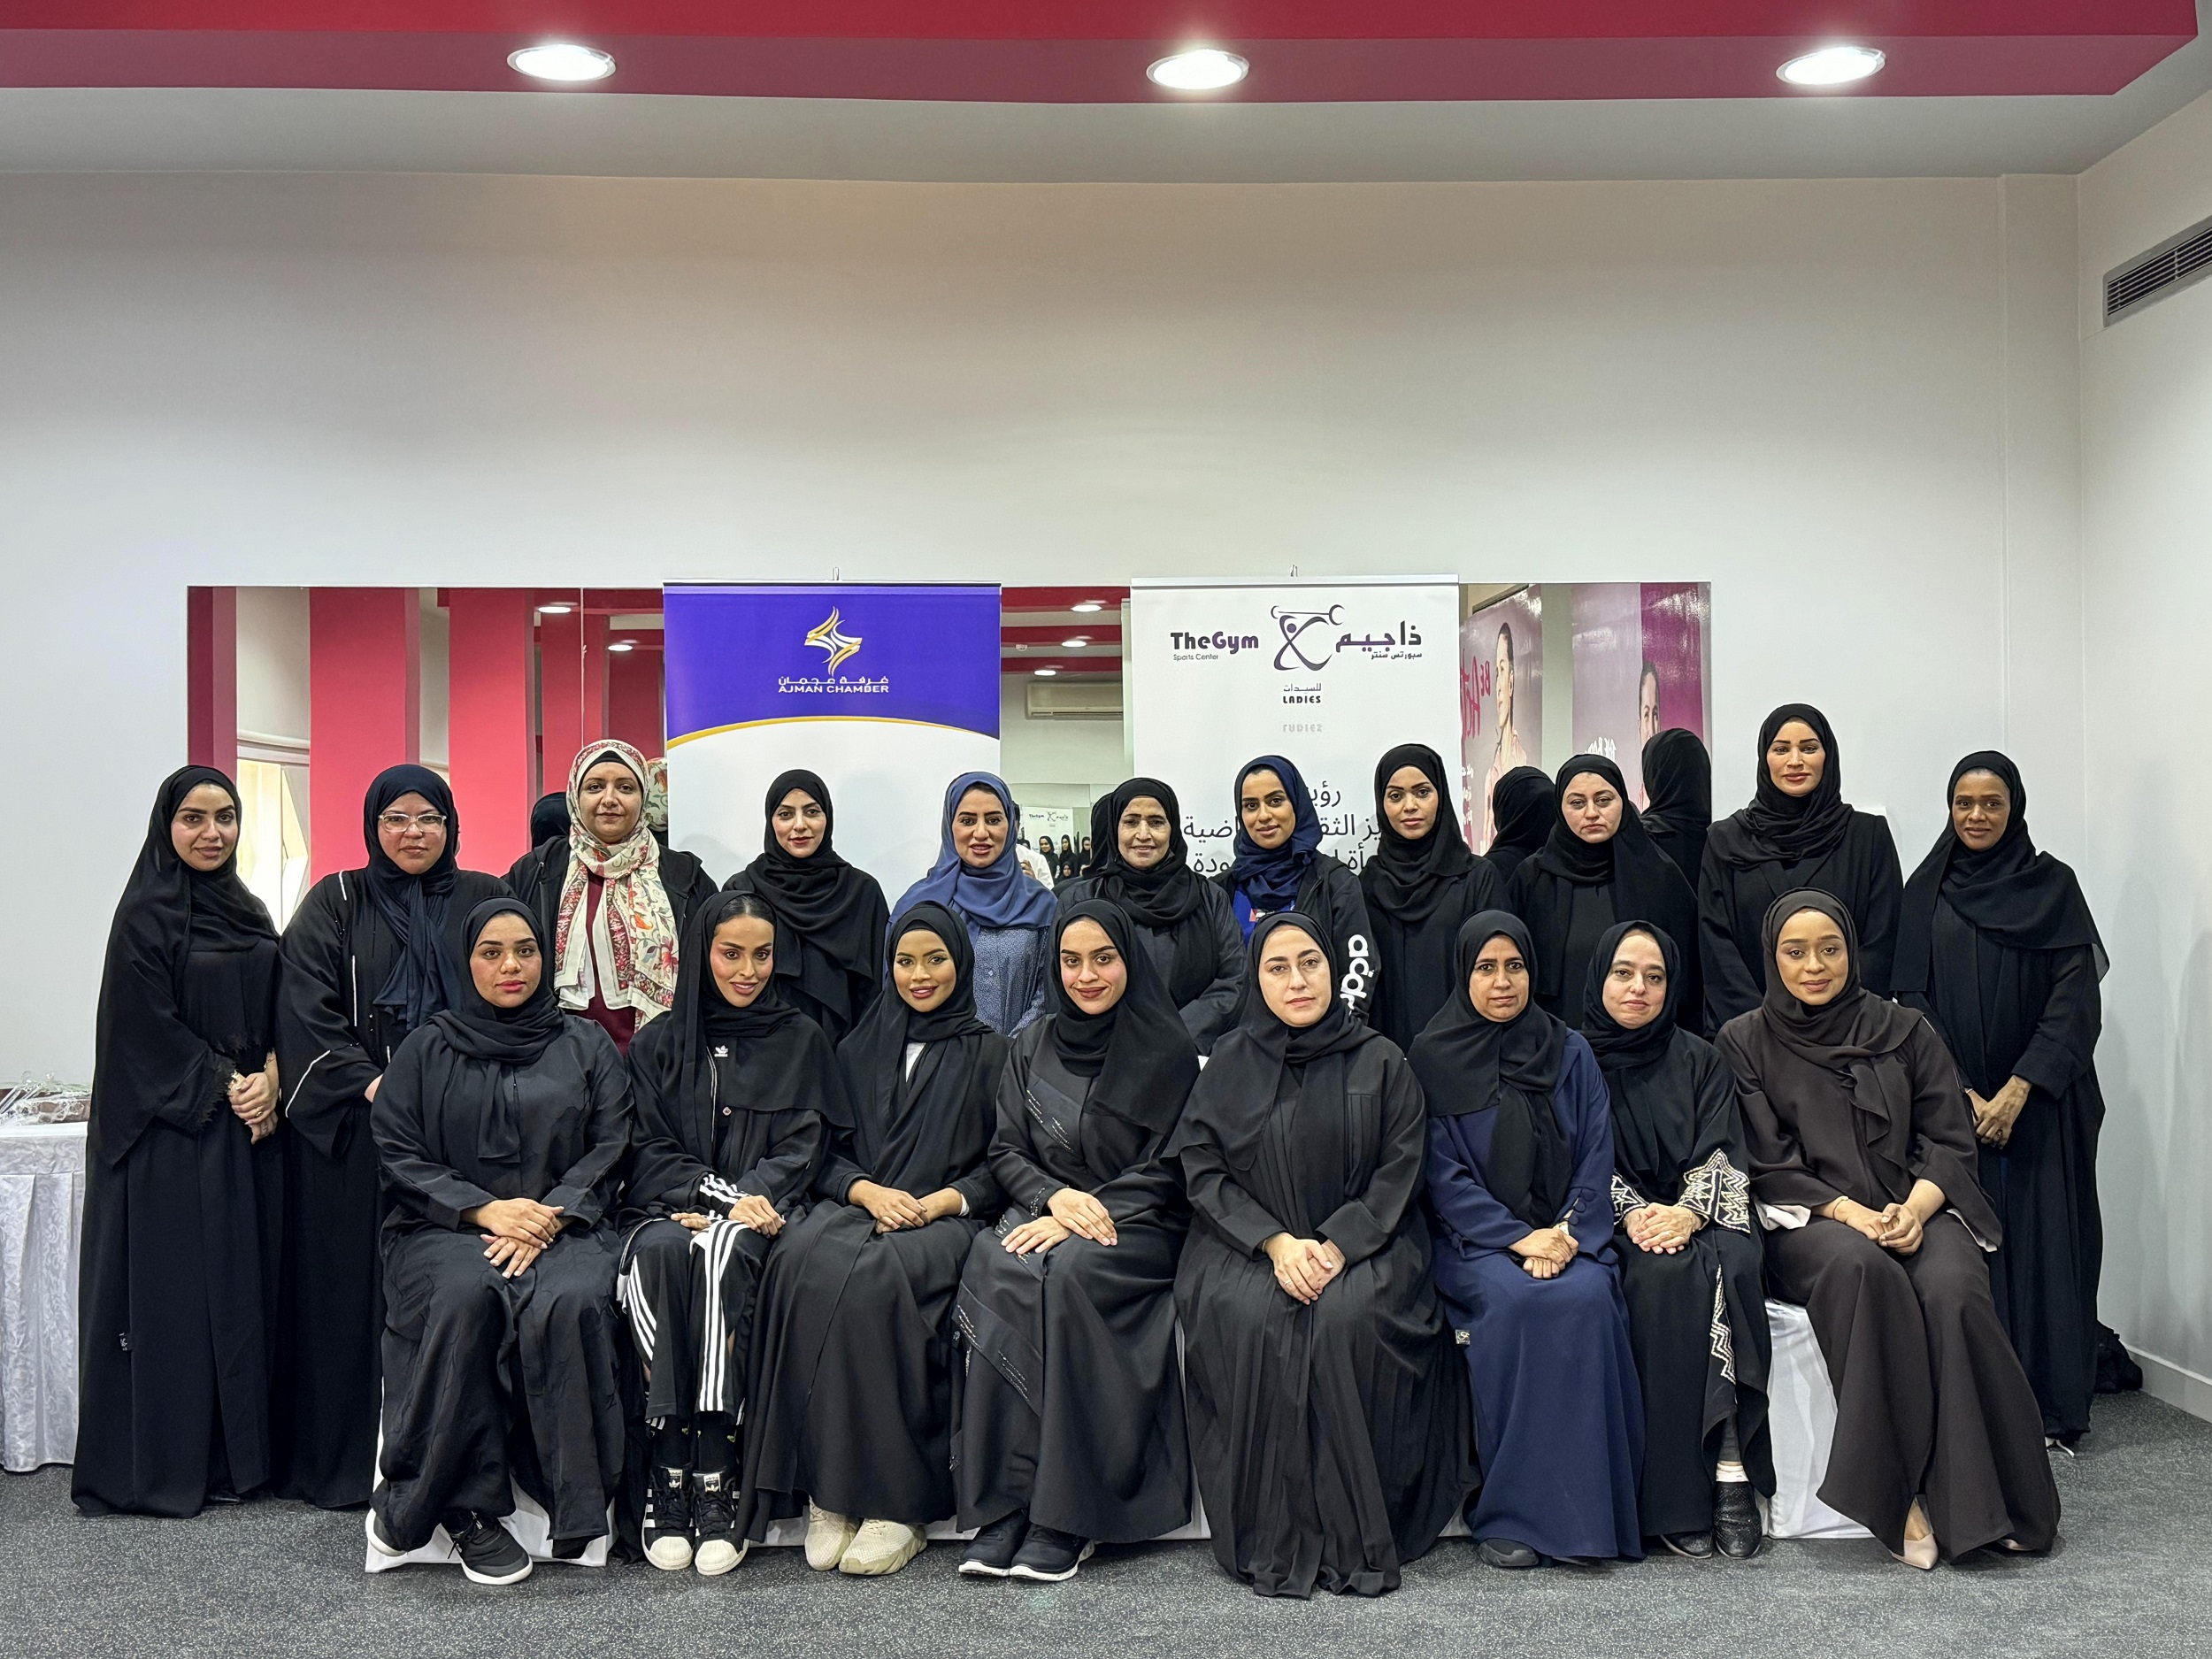 Ajman Business Women Council organizes a sports event in support of women’s health and happiness